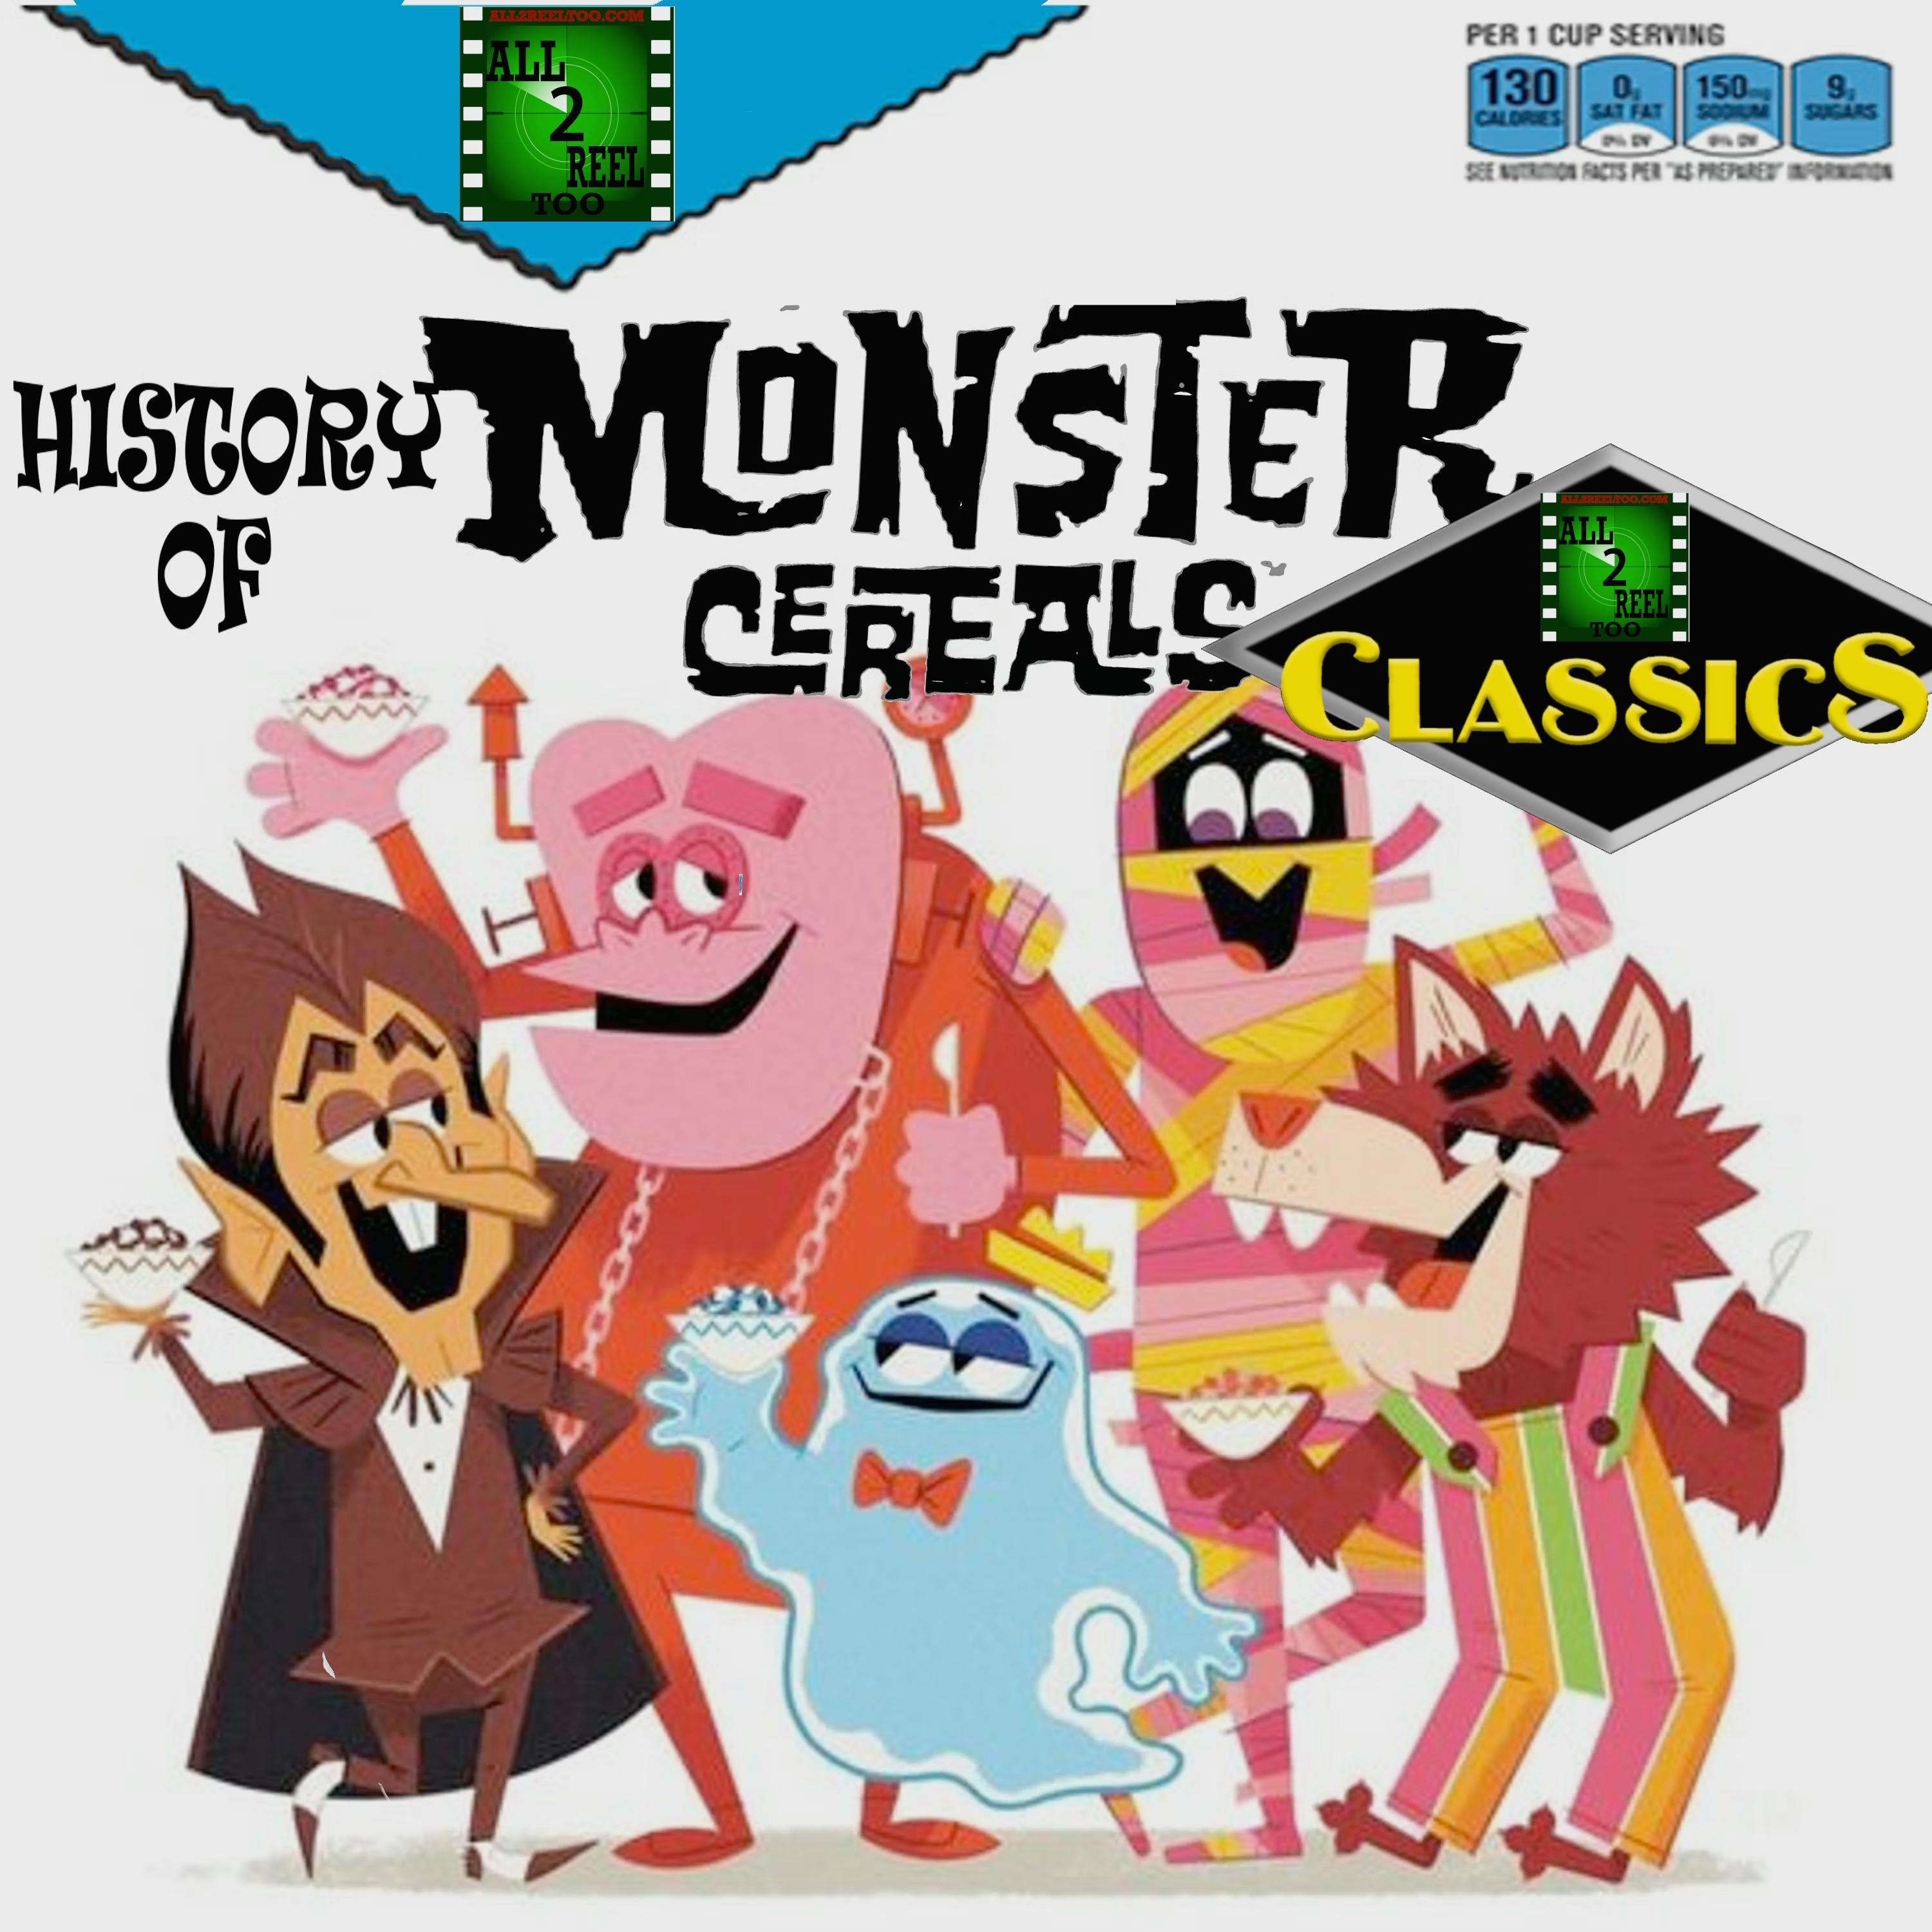 HISTORY OF MONSTER CEREALS  -  ALL2REELTOO CLASSICS